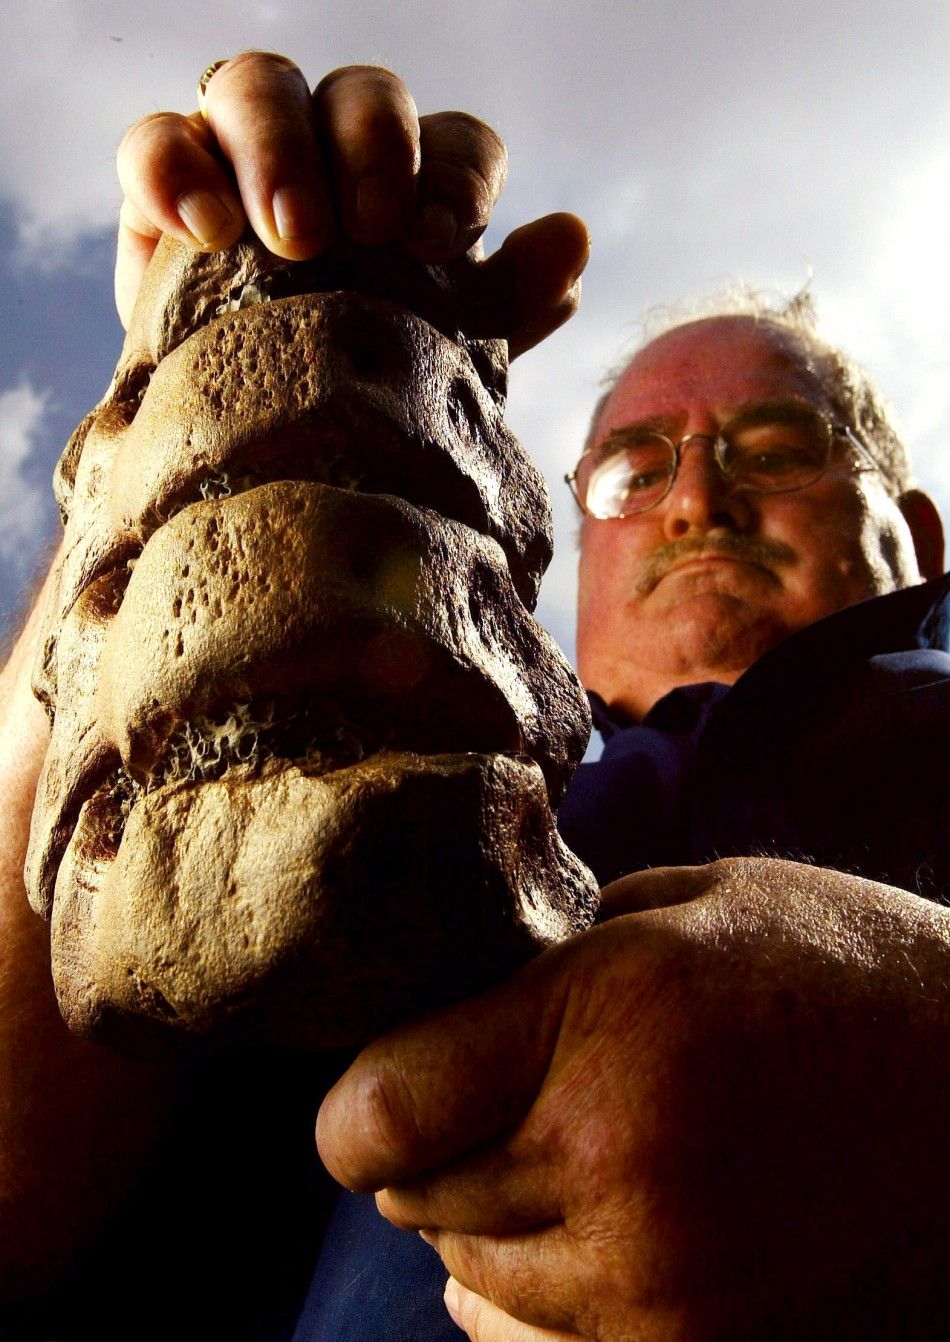 Gerald McSorley holds up a Jurassic fossil, clearly showing four prefectly preserved vertebrae,